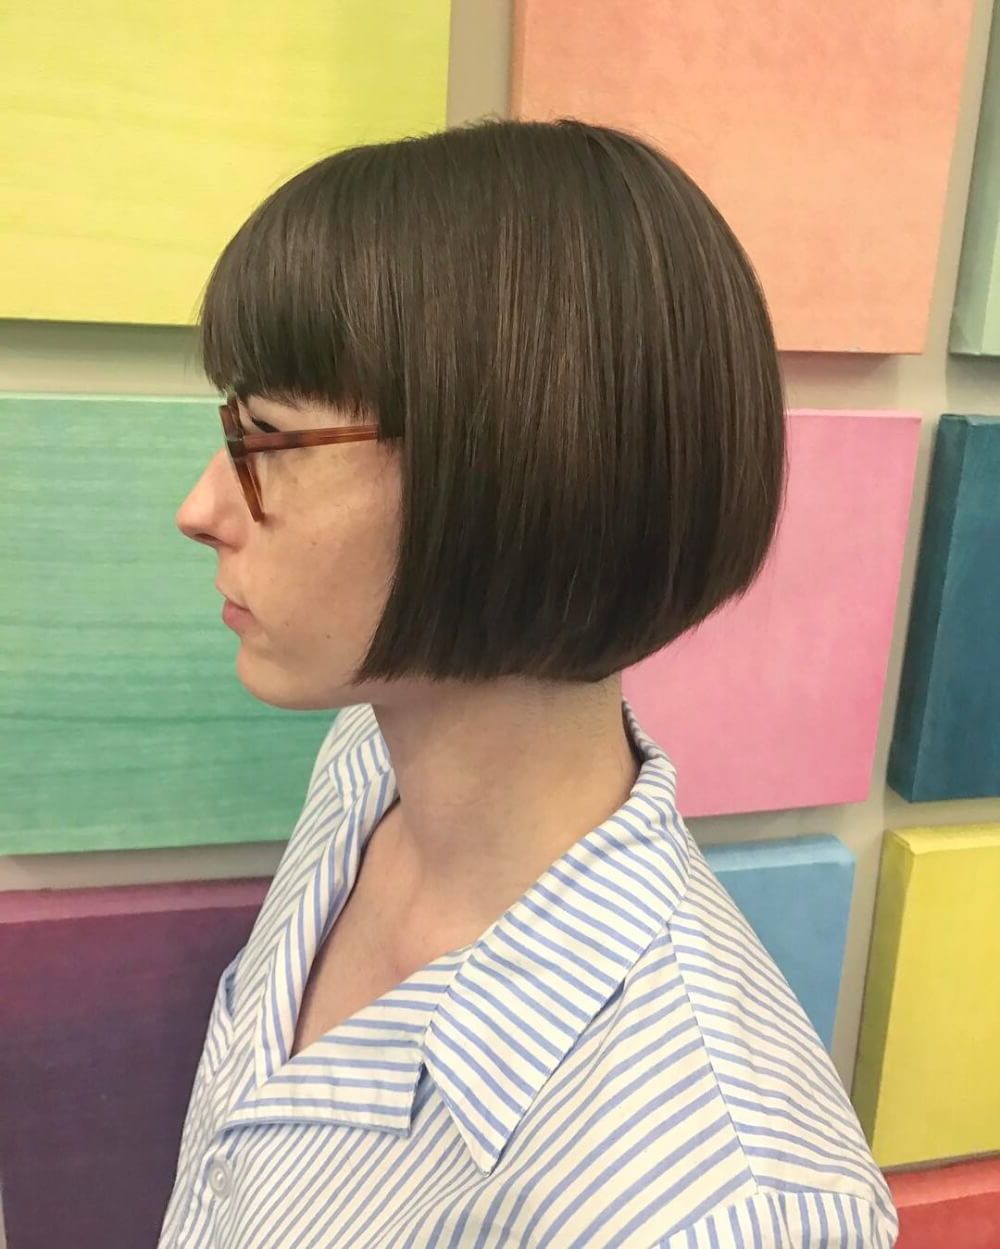 50 Chic Short Bob Hairstyles & Haircuts For Women In 2019 Inside Hort Bob Haircuts With Bangs (View 17 of 20)